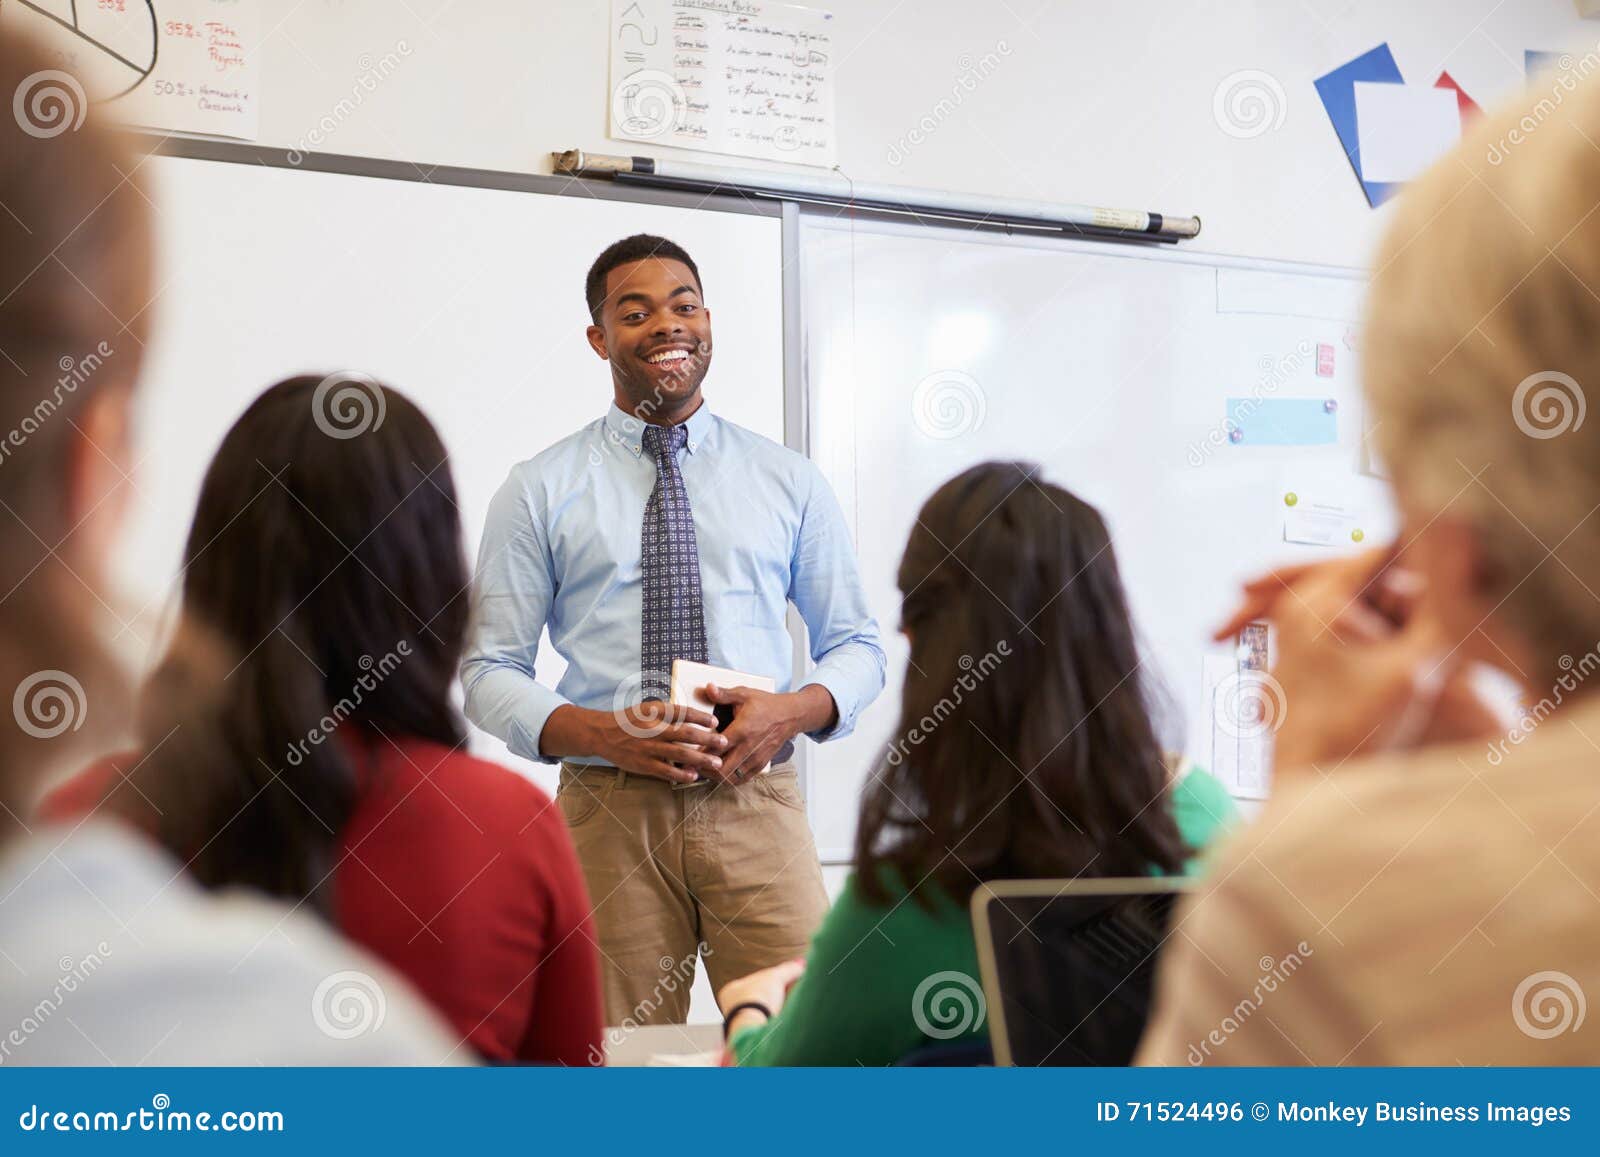 male teacher in front of students at an adult education class